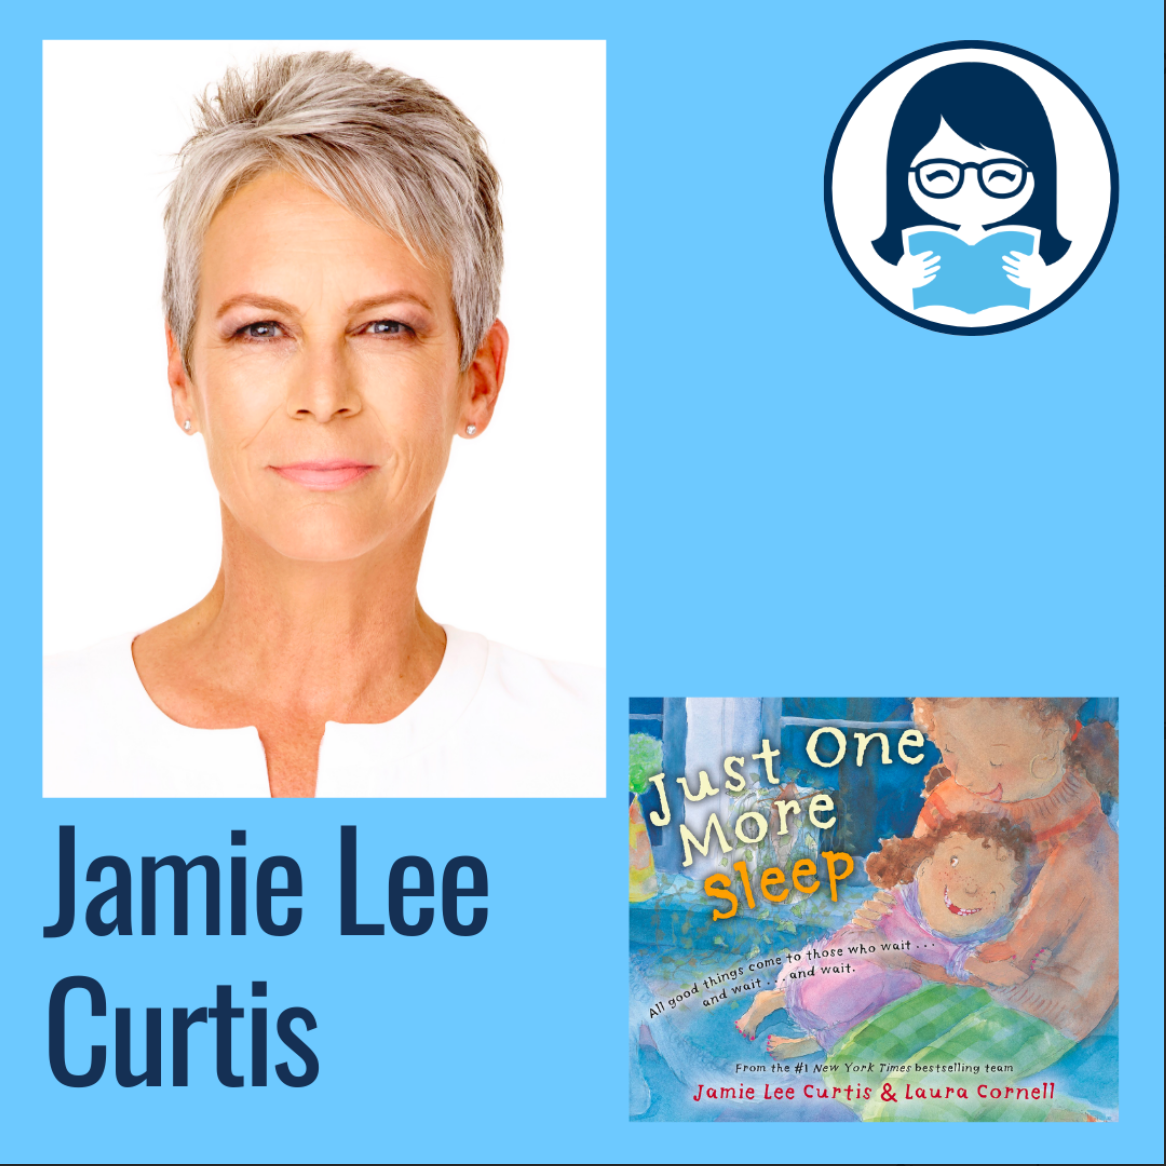 Jamie Lee Curtis, JUST ONE MORE SLEEP: All Good Things Come to Those Who Wait . . . and Wait . . . and Wait